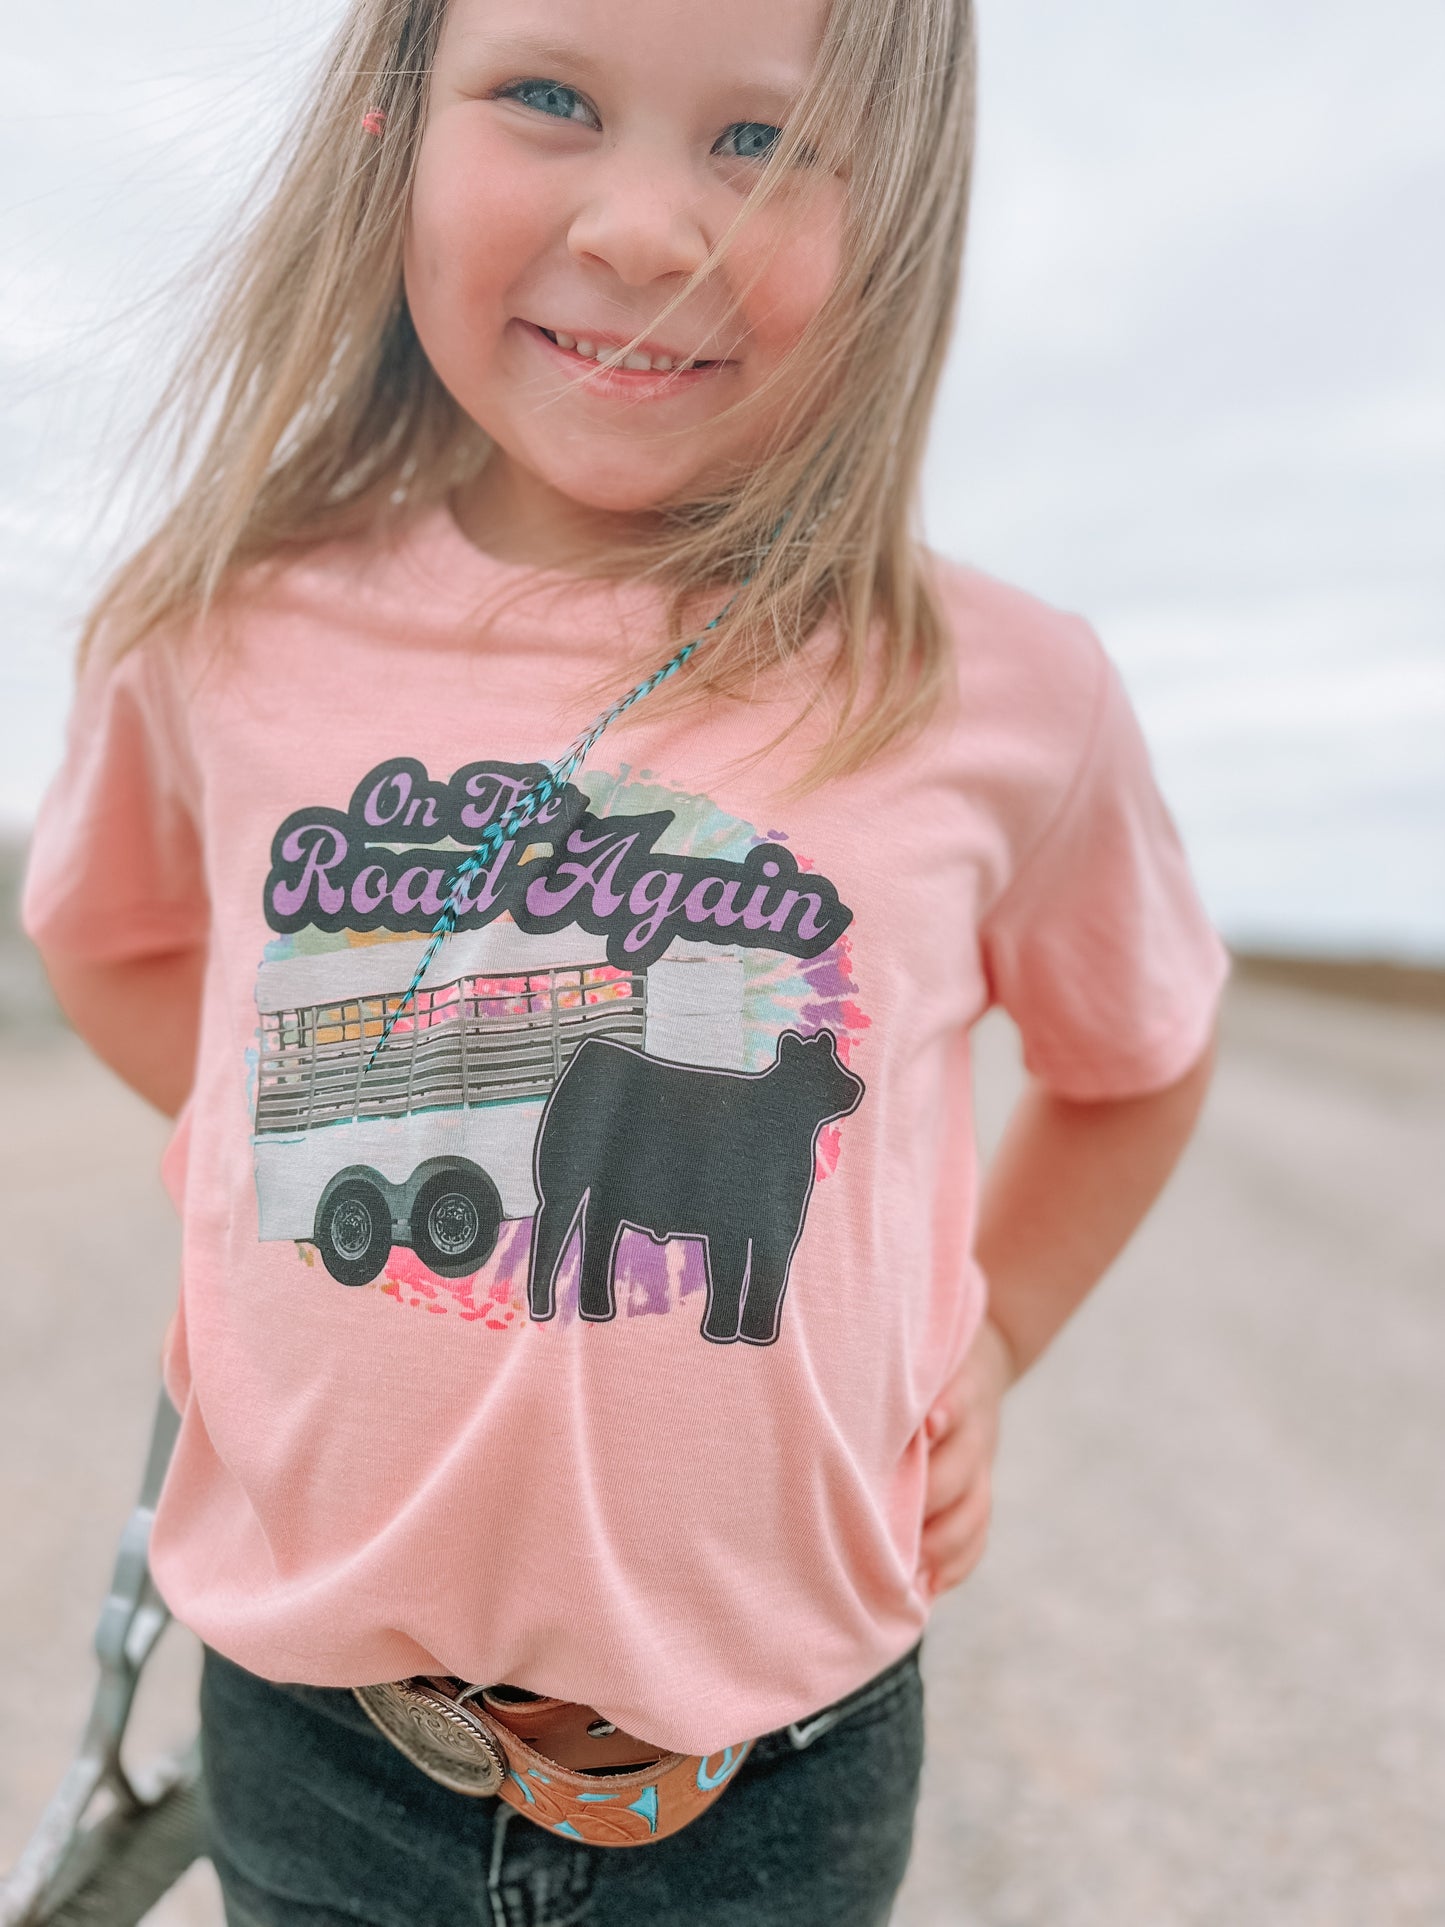 the On the |Road| Again littles tee